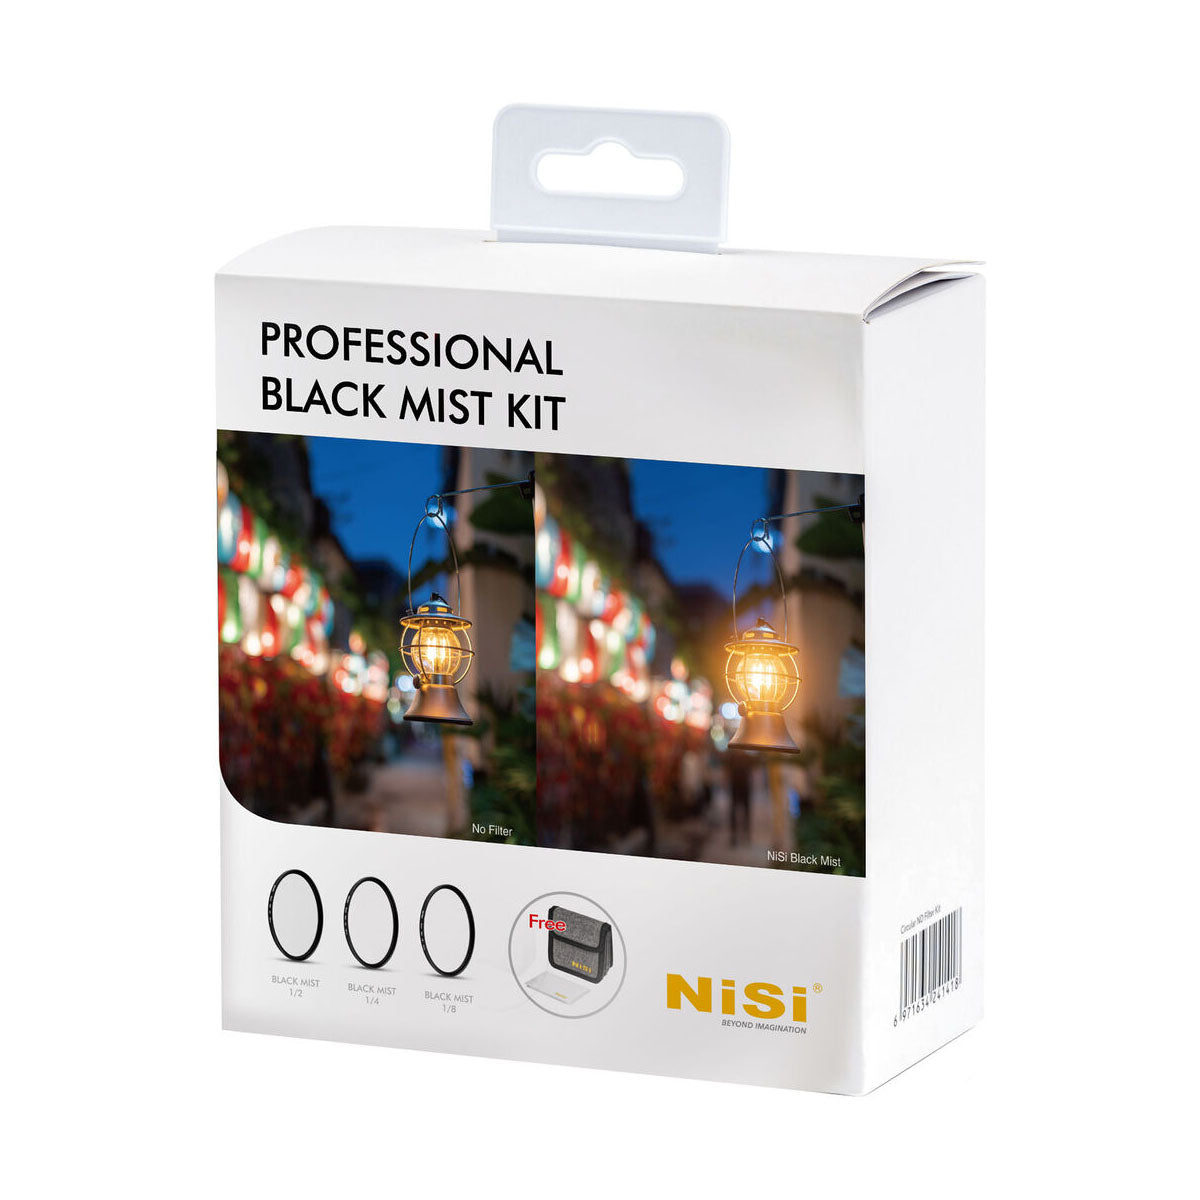 NiSi 77mm Professional Black Mist Kit with 1/2, 1/4, 1/8 and Case